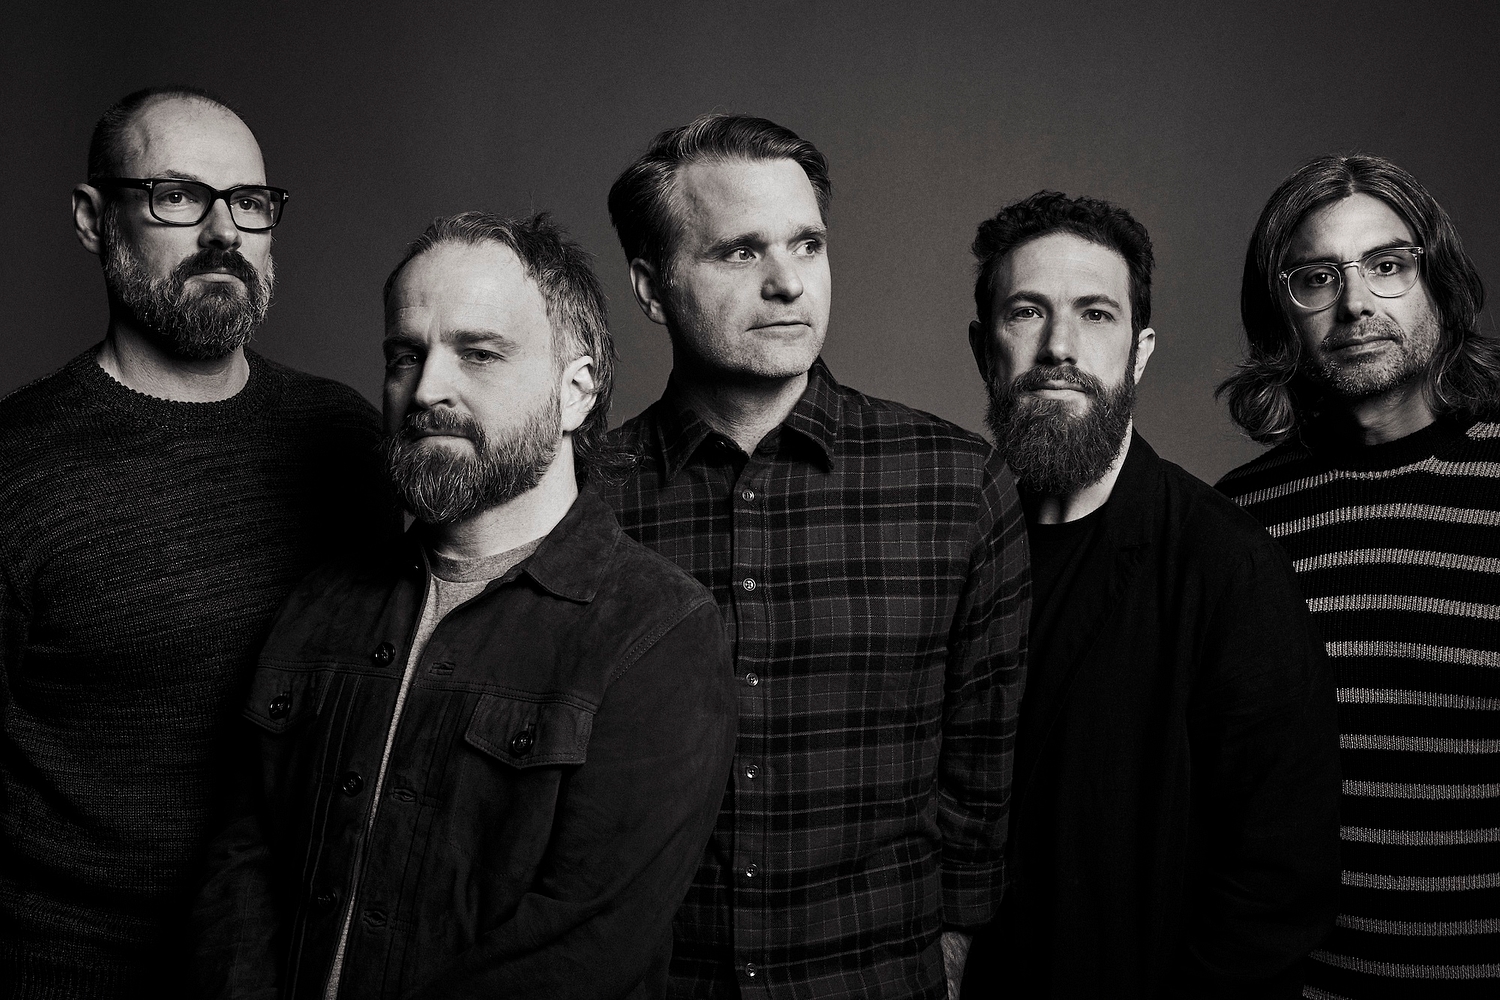 Death Cab For Cutie: “I want us to be the best version of what we are”